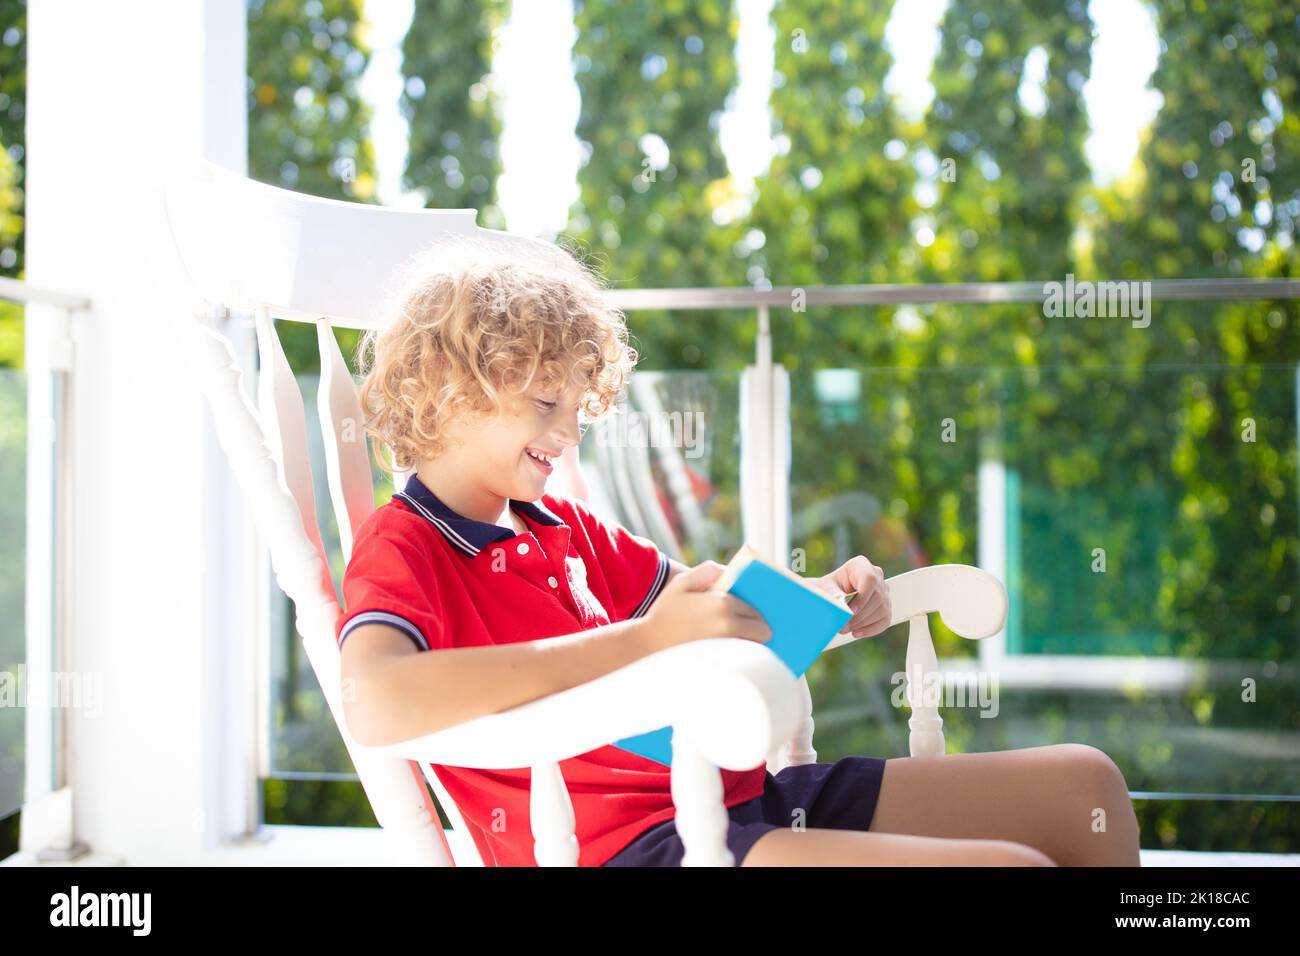 Child reading on home balcony. Outdoor patio of city apartment building. Safe glass railing for little kids. Boy playing on sunny terrace. Stock Photo